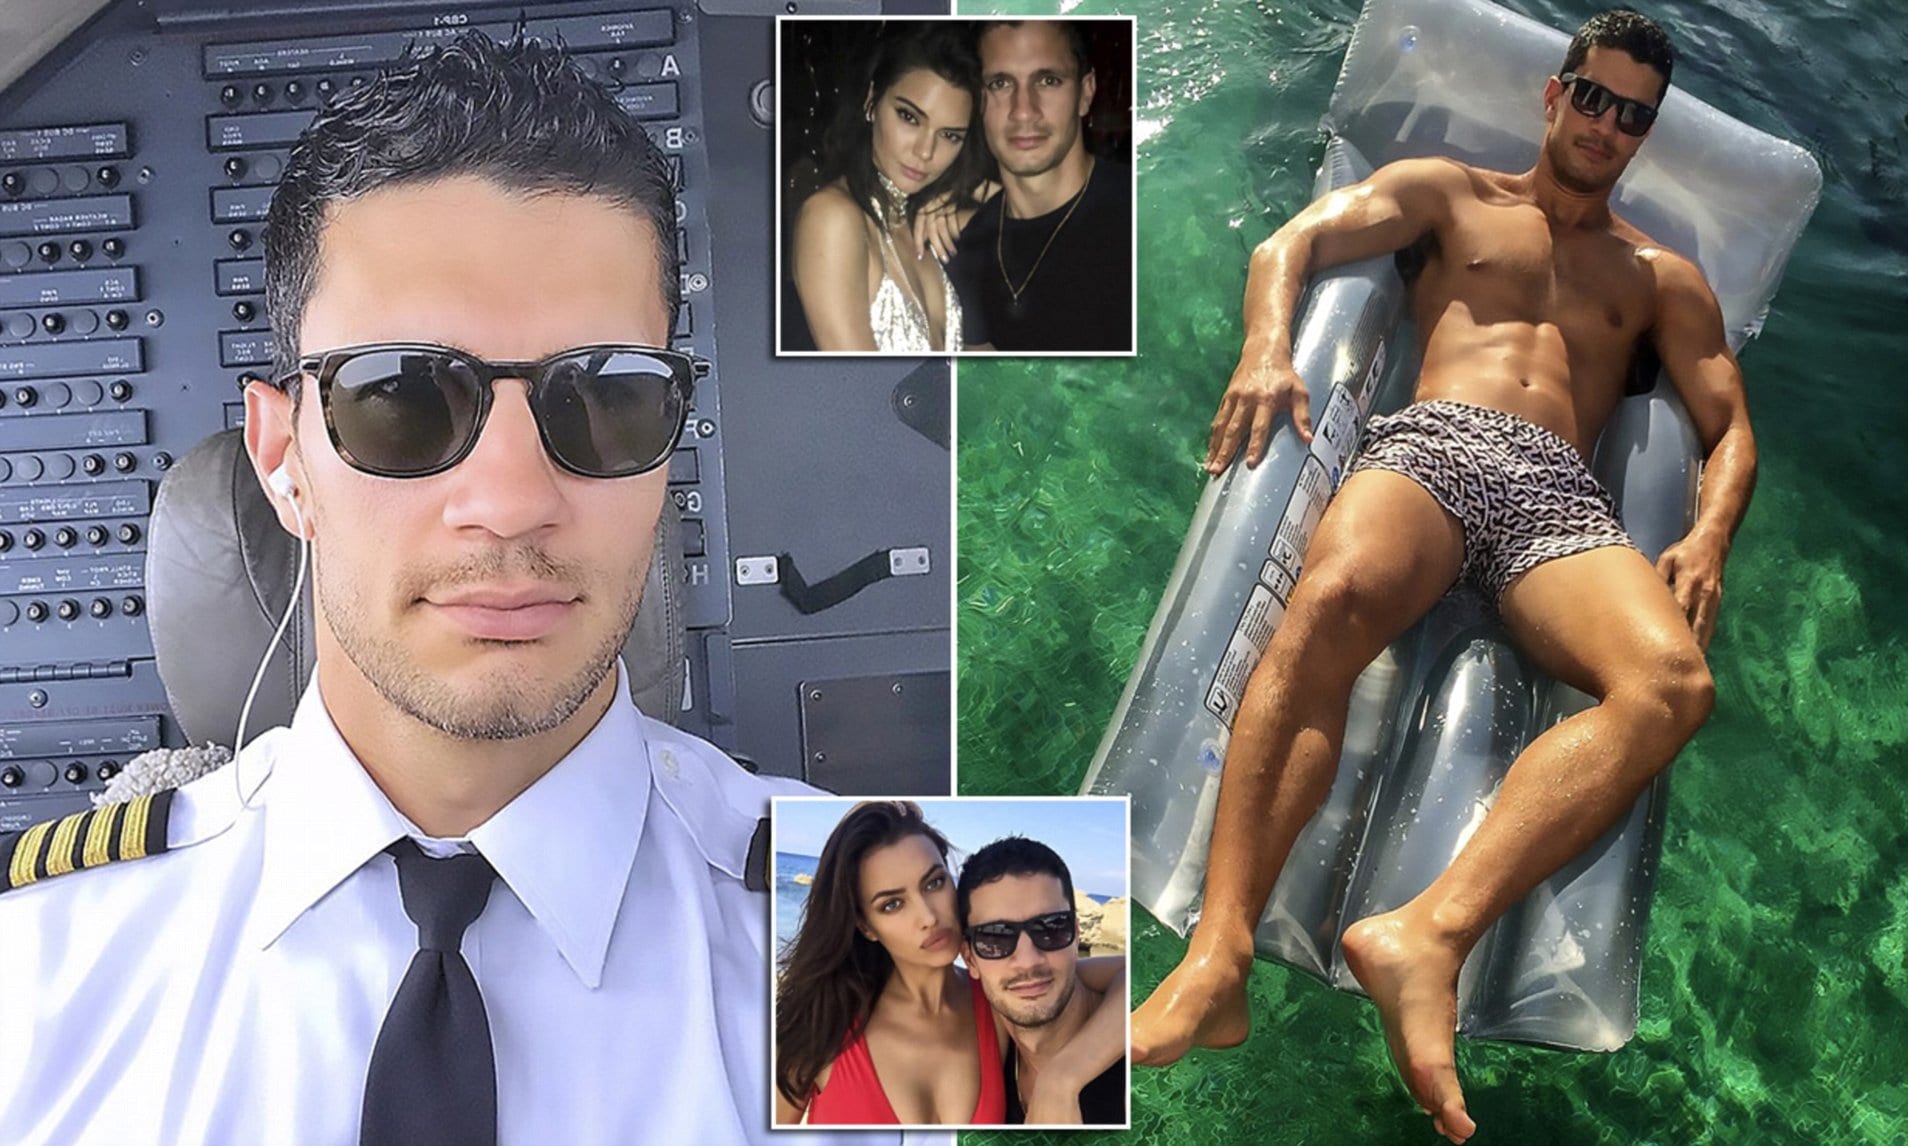 Pics shows: Isai Ortiz;nnThis is the handsome pilot who has caused a stir on social media with his sensual snaps and friendships with stars such as Kendall Jenner and Cristiano Ronaldo¿s ex-WAG Irina Shayk.nnIsai Ortiz is a pilot from the town of Naguabo in Puerto Rico who has gained over 174,000 followers on social media thanks to his toned physique and devilish good looks.nnThe pilot has posted photos with his famous friends, including models Kendall Jenner and Irina Shayk.nnOrtiz is a Christian, and his bio on social media states "I can do ALL things through #Christ who strengthens me!"nnHe often wows followers with topless photos that show off his defined abs.nnNetizen ¿jasie9¿ wrote on a recent photo: "So sexy."nnWhilst user ¿joparkinson33¿ commented: "Wow you're gorgeous and super hotttt."nnOn the photo with Russian model and Cristiano Ronaldo¿s ex-WAG Irina Shayk, Ortiz commented: "Irina; very few ppl of her status, that I have met, are as incredibly humble, friendly, always happy, not to forget stunning, and putting a smile on the people around her like she is/does.nn"If only others were like her."nnThe hunky pilot also posted a photo with superstar model Kendall Jenner, simply captioning the snap: "She is stunning."